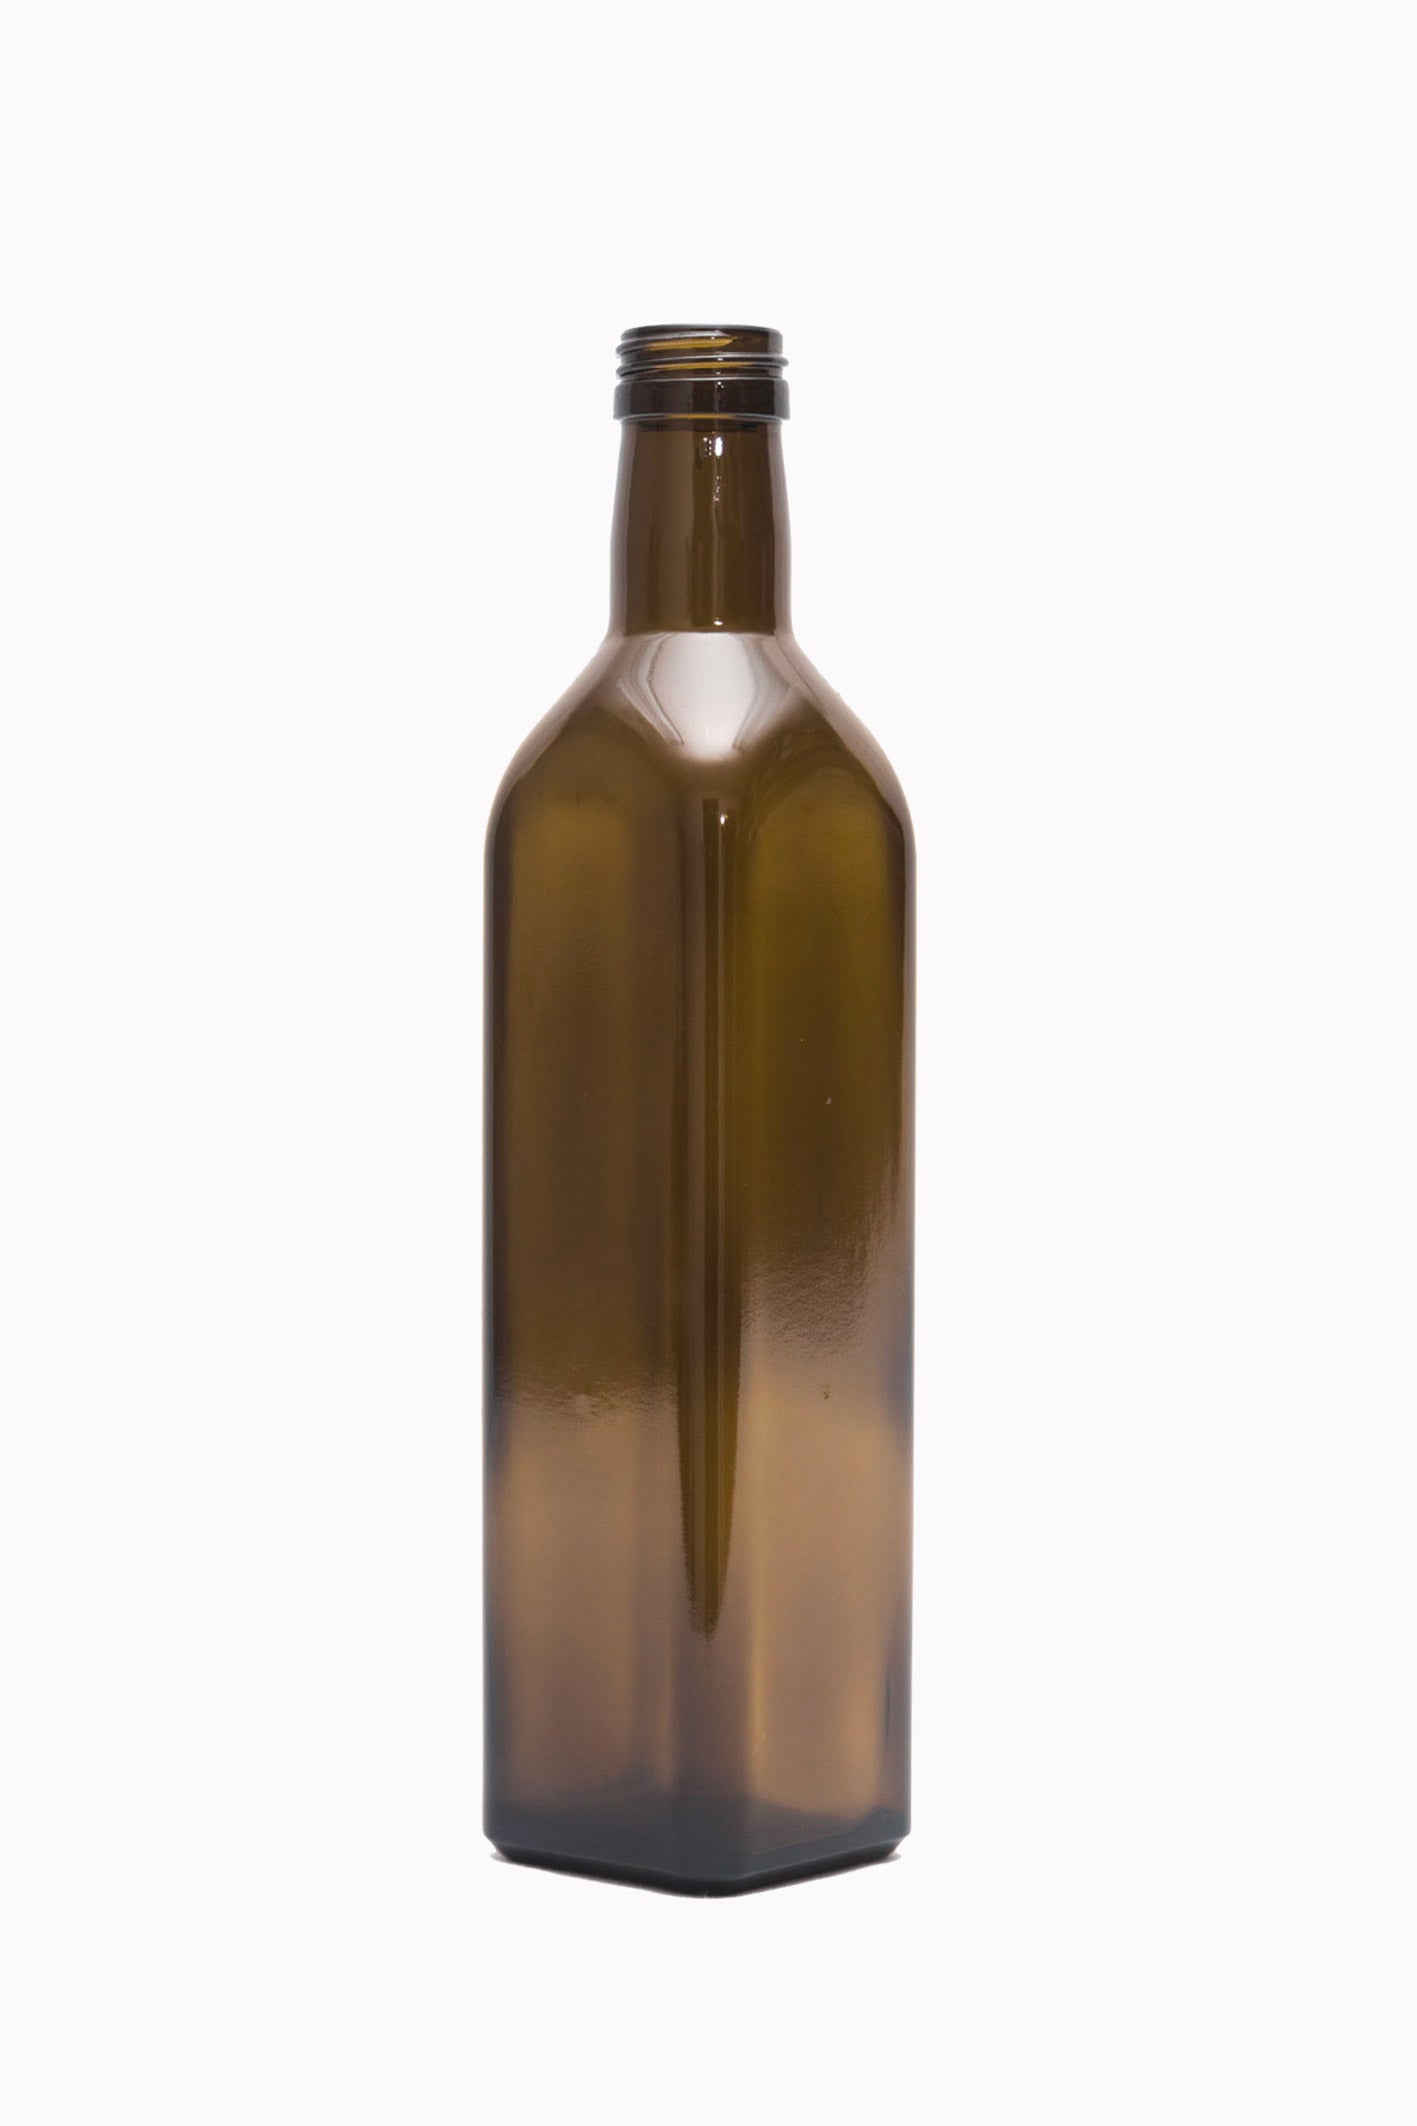 This is 500ml Marasca, one of the most recognizable bottles in the Olive Oil industry.